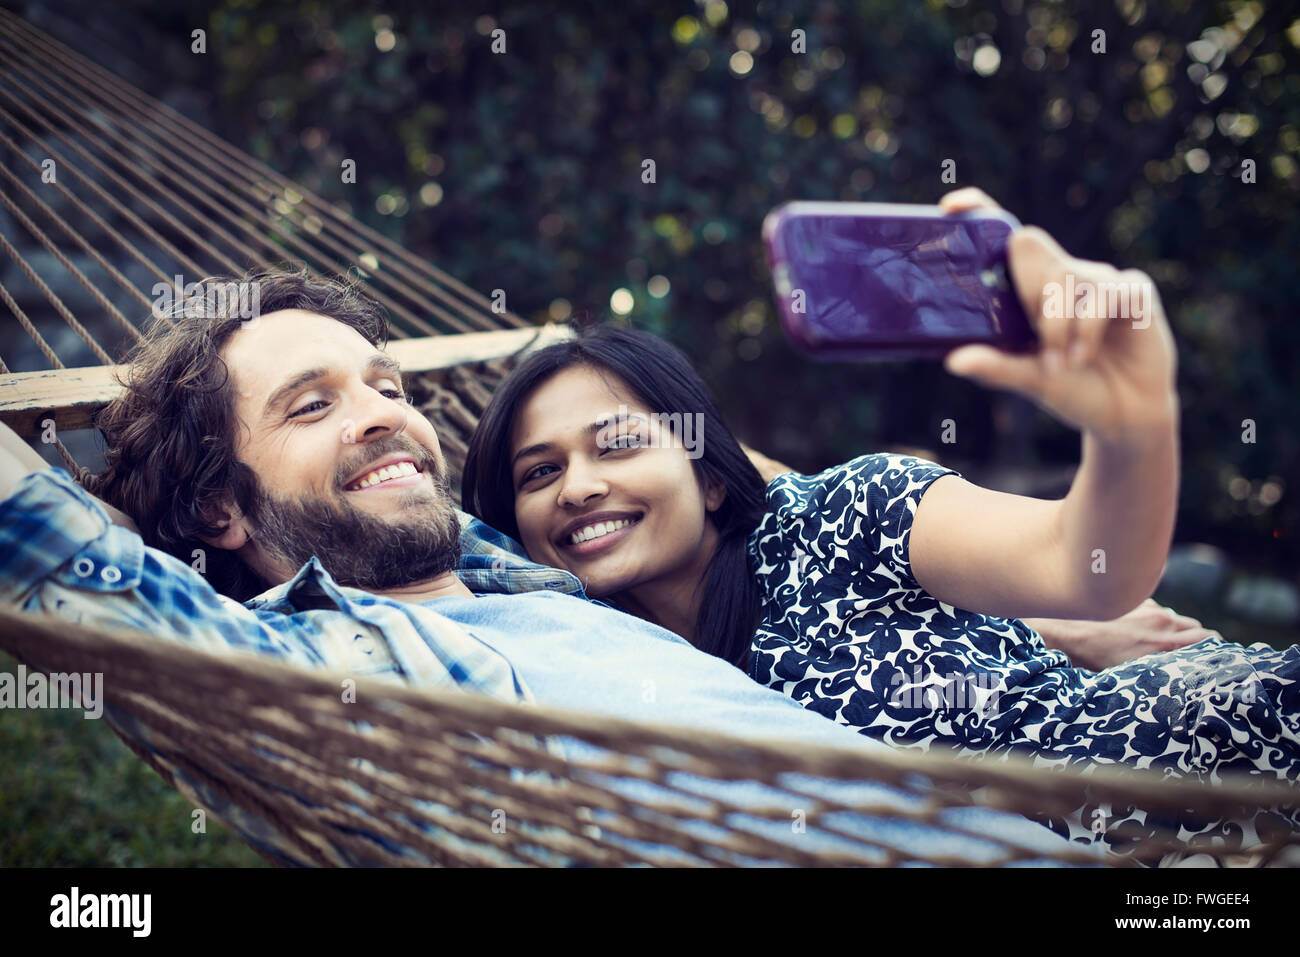 A couple, a young man and woman lying in a large hammock in the garden, taking a selfy of themselves. Stock Photo